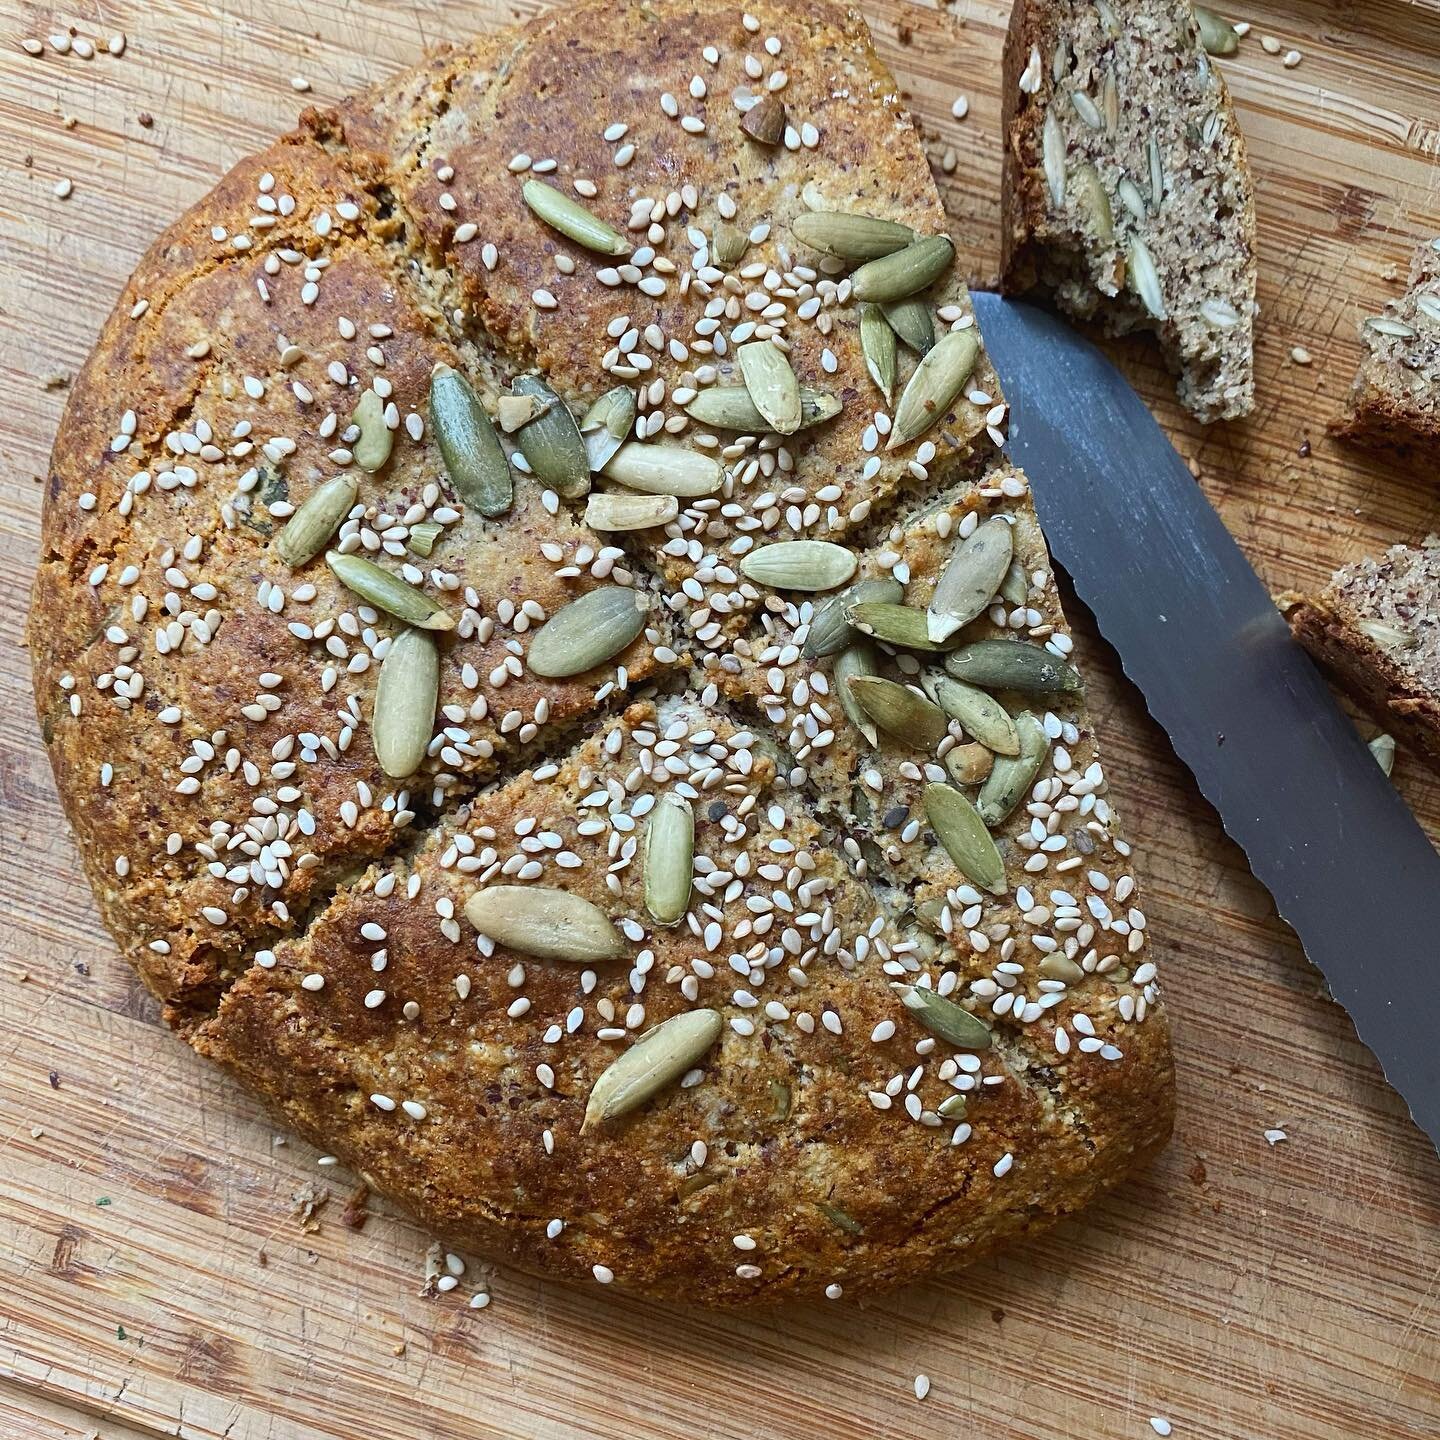 An oldie but goodie, Better-Than-Bread bread 🍞 from my cookbook 💚 you would never know it&rsquo;s #GlutenFree 👍 super easy, mix all the ingredients in a large bowl and bake for 20 min. 🤩 Great little project for a cold and snowy ❄️ Sunday🙏 All y